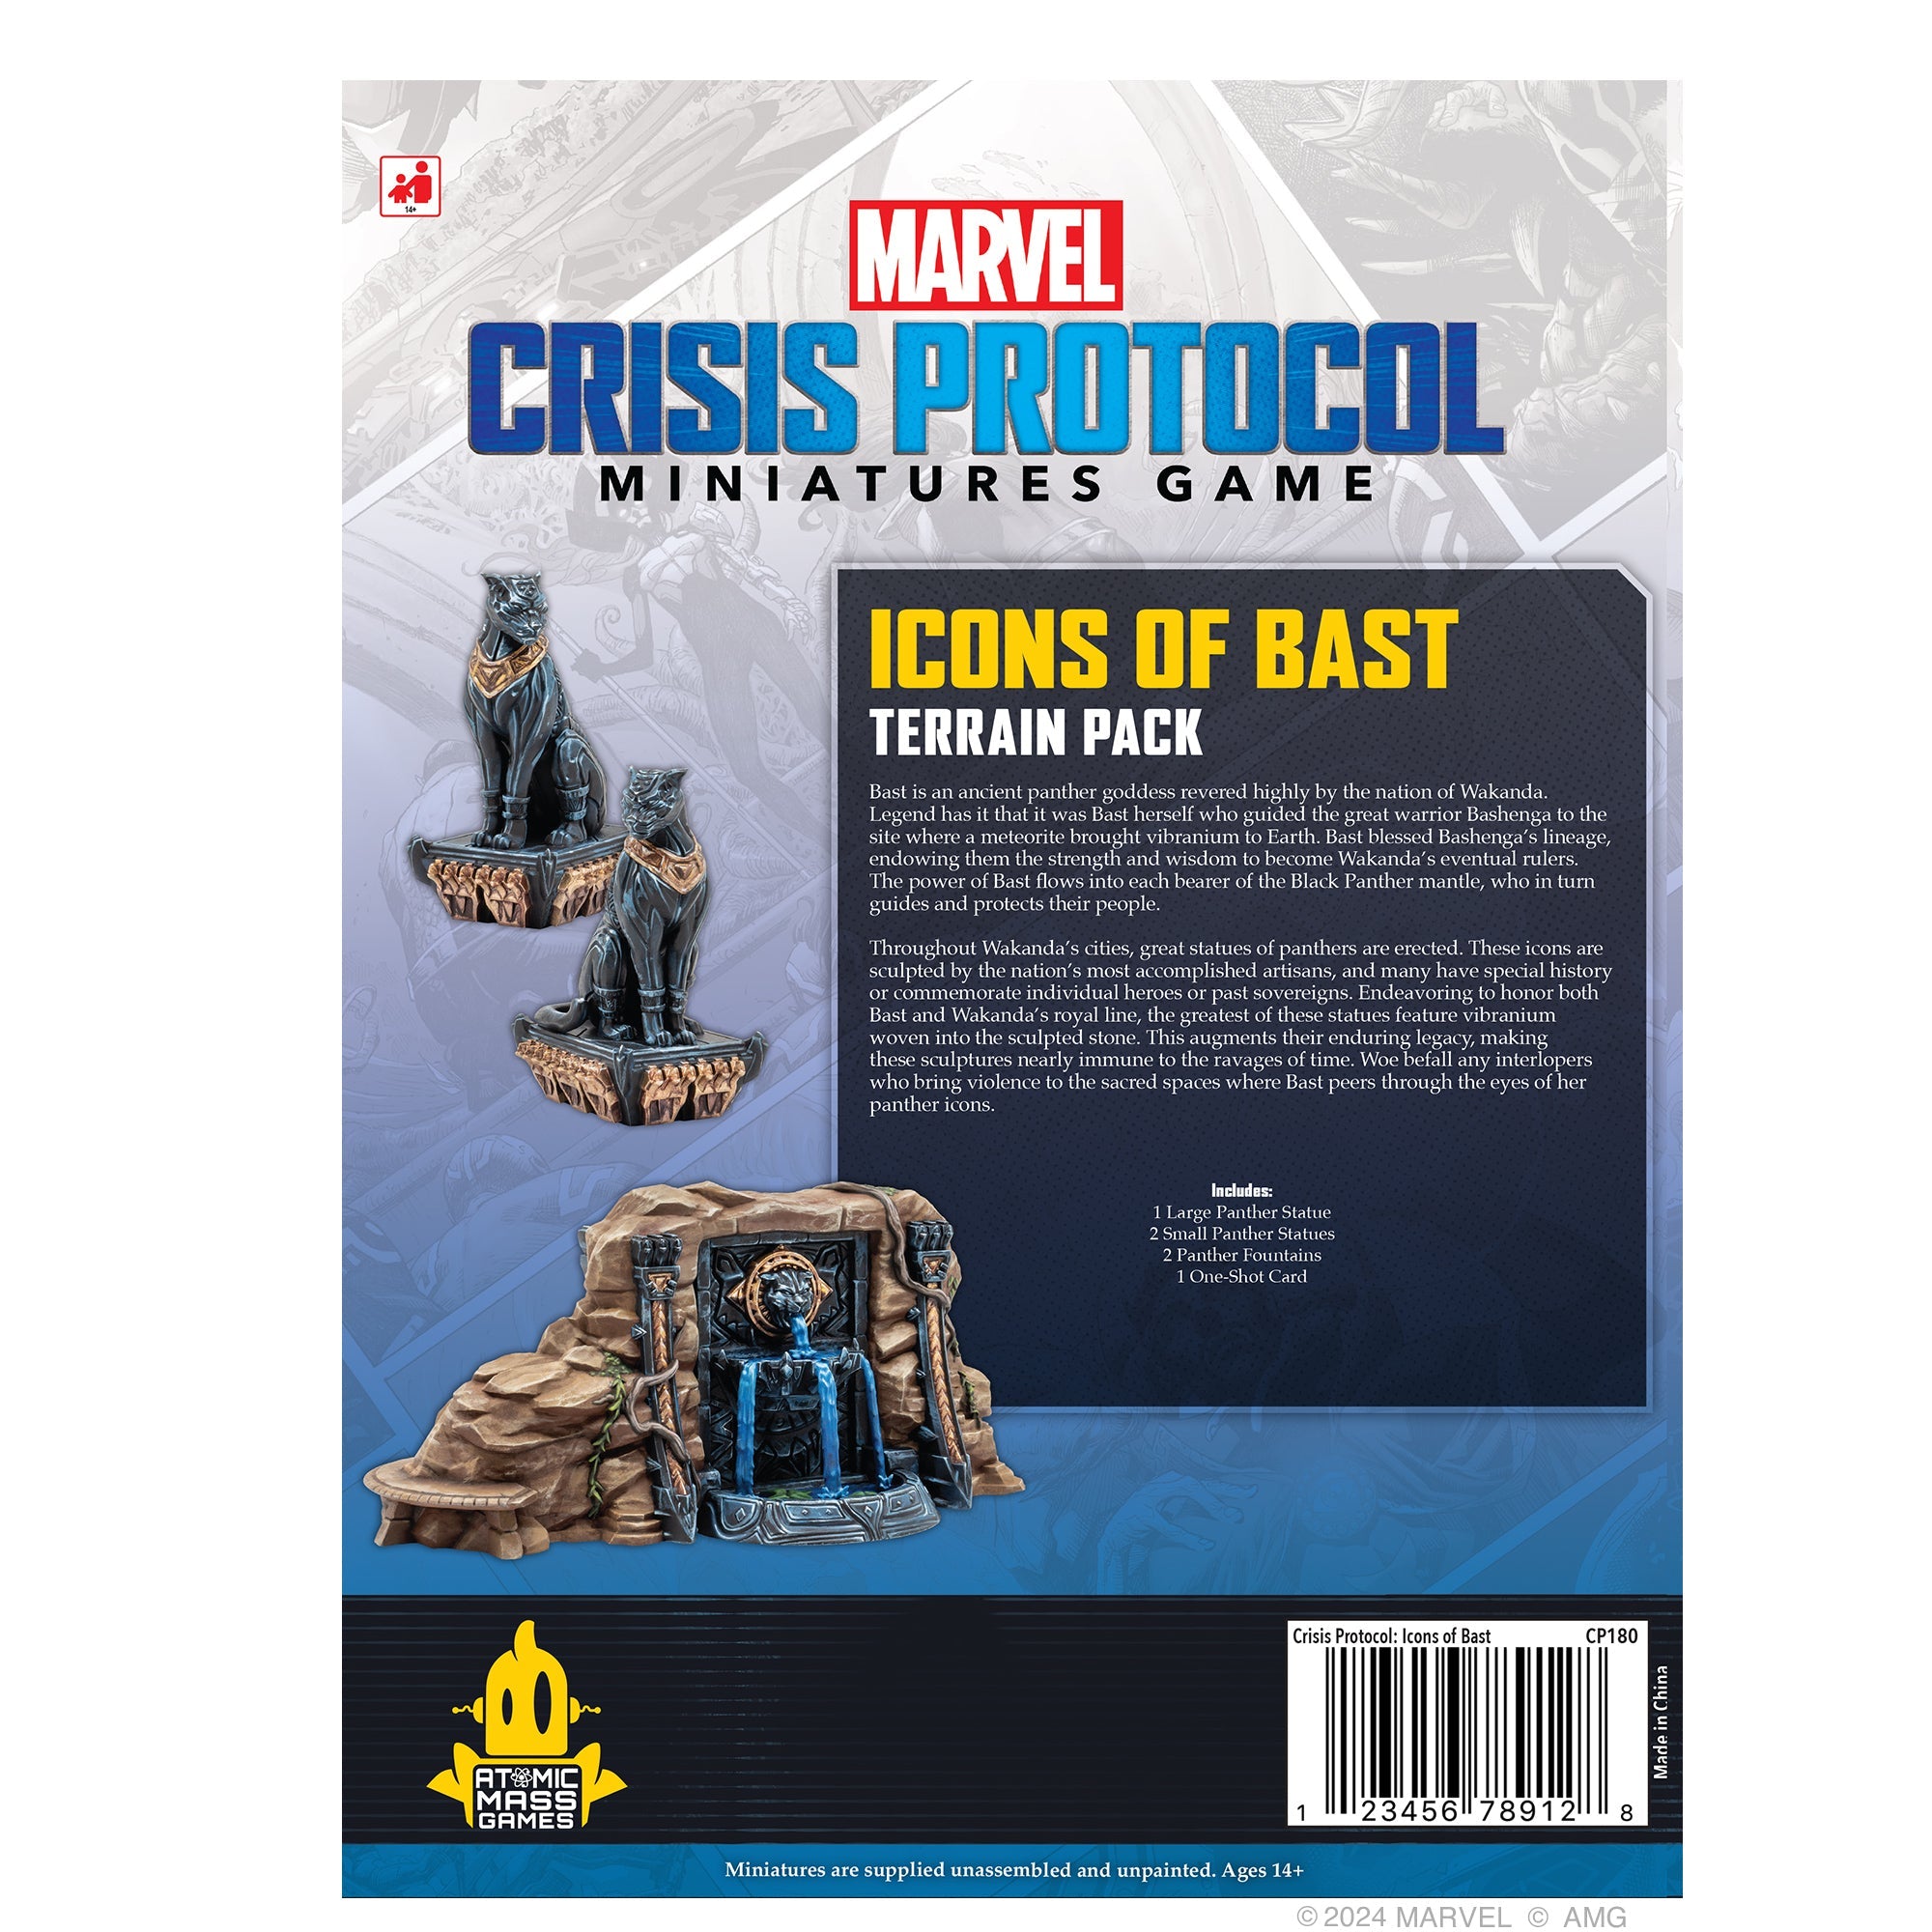 MARVEL CRISIS PROTOCOL: ICONS OF BAST TERRAIN PACK | BD Cosmos